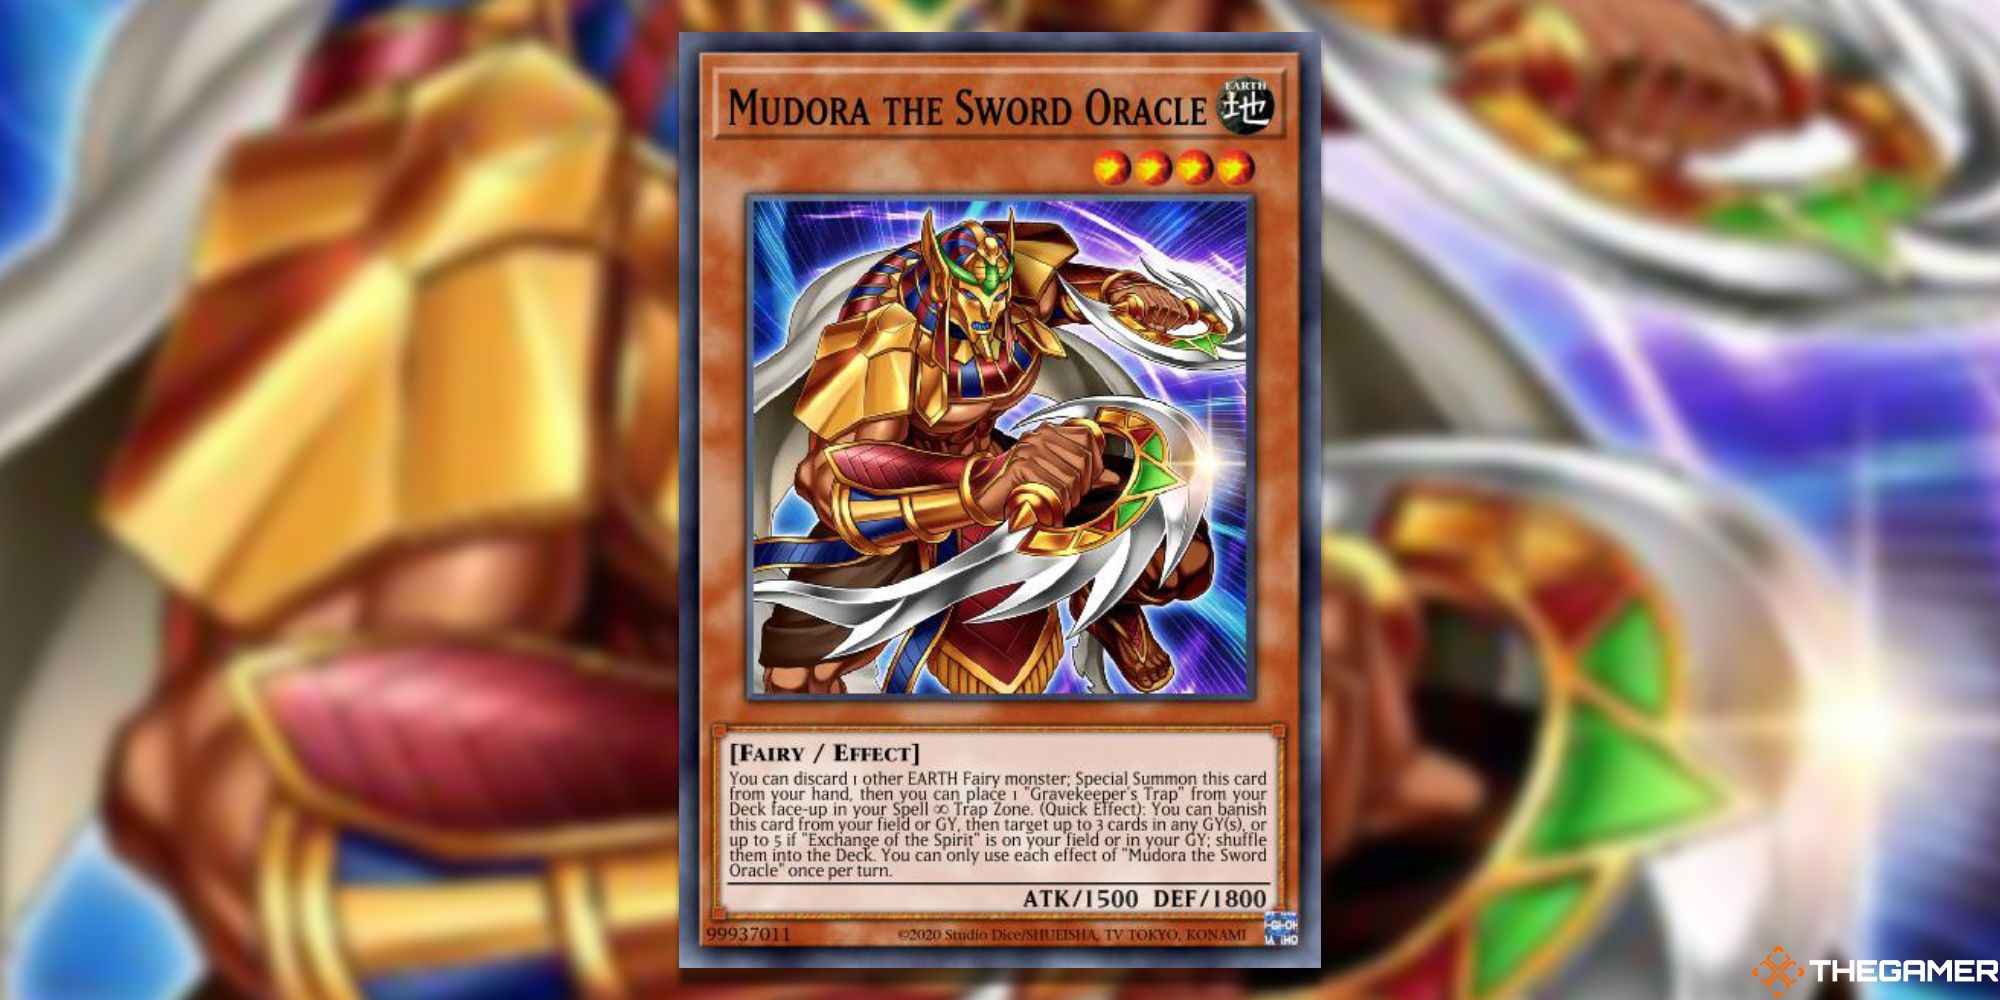 Mudora the Sword Oracle Full Card by Yu-Gi-Oh! with Gaussian Blur Master Duel